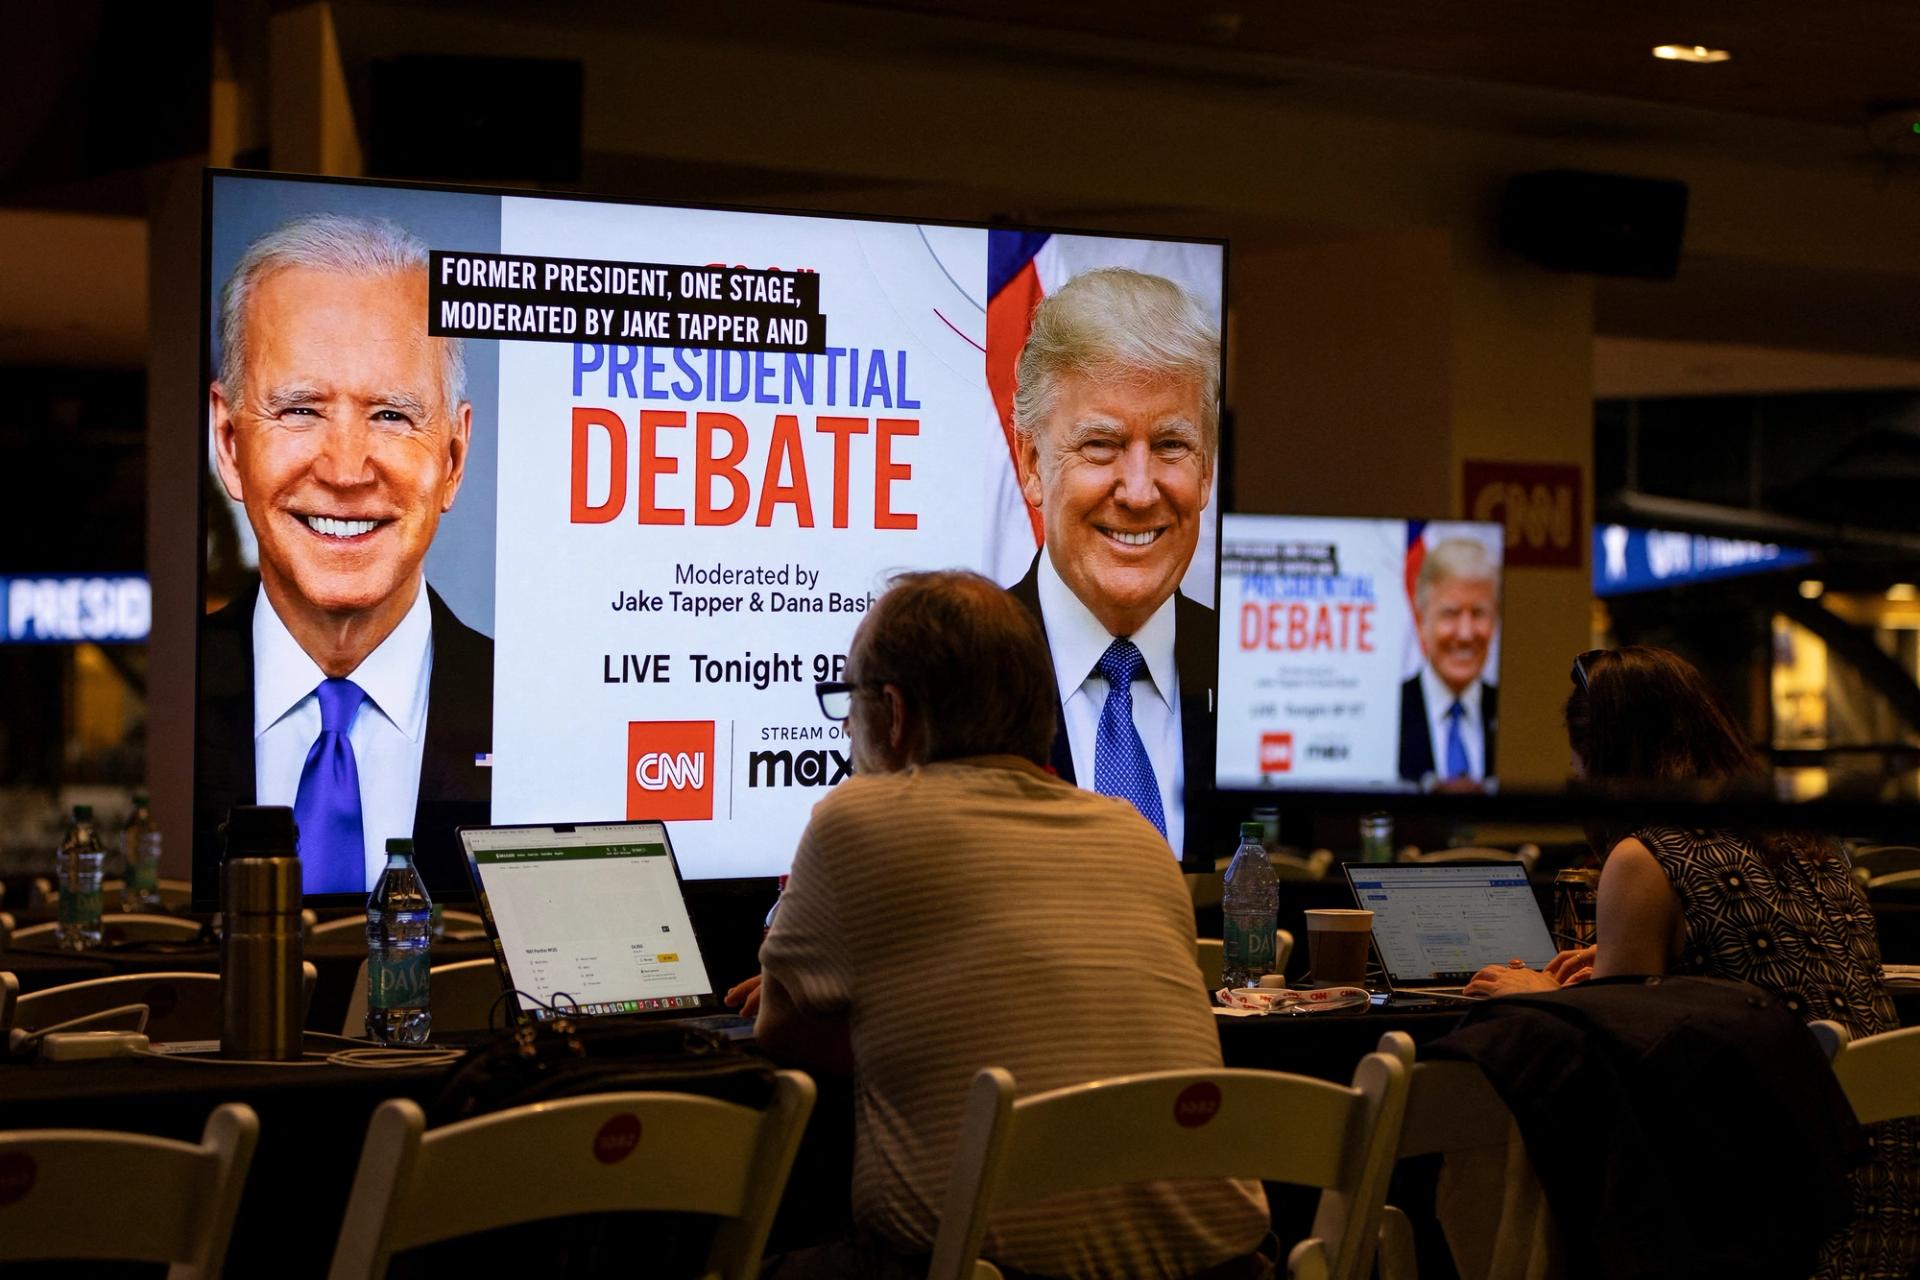 FILE PHOTO: Media crews work at the press room in the McCamish Pavilion on the Georgia Institute of Technology campus ahead of the first 2024 presidential debate between Democratic presidential candidate U.S. President Joe Biden and Republican presidential candidate former U.S. President Donald Trump in Atlanta, Georgia, U.S., June 27, 2024. REUTERS/Marco Bello/File Photo